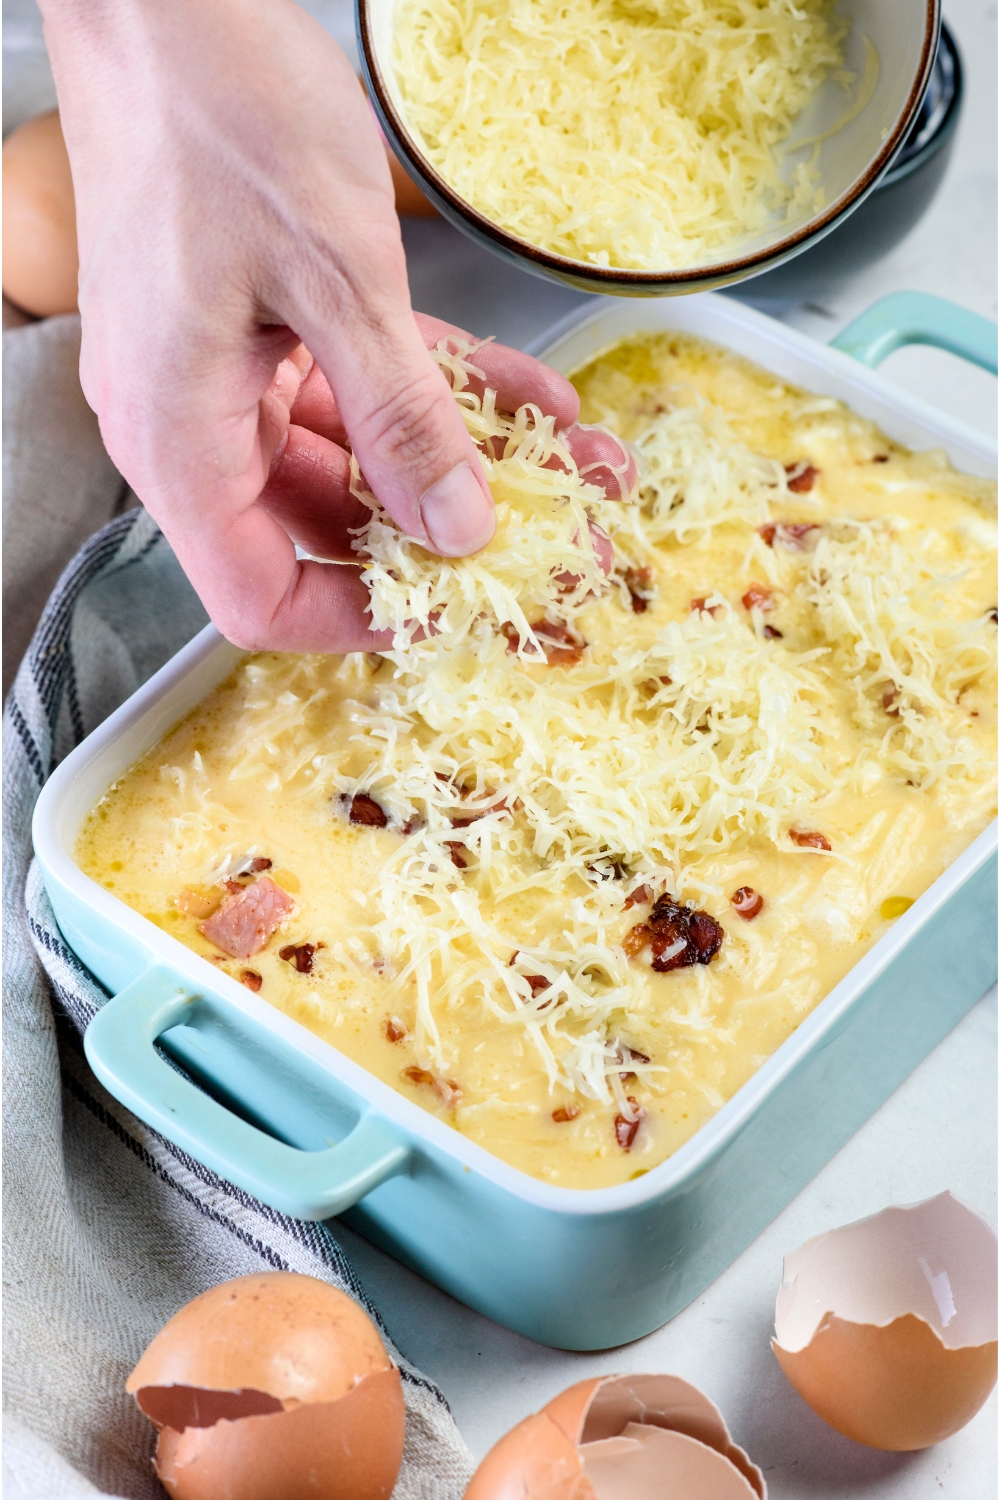 A hand spreading shredded cheese over an unbaked casserole.